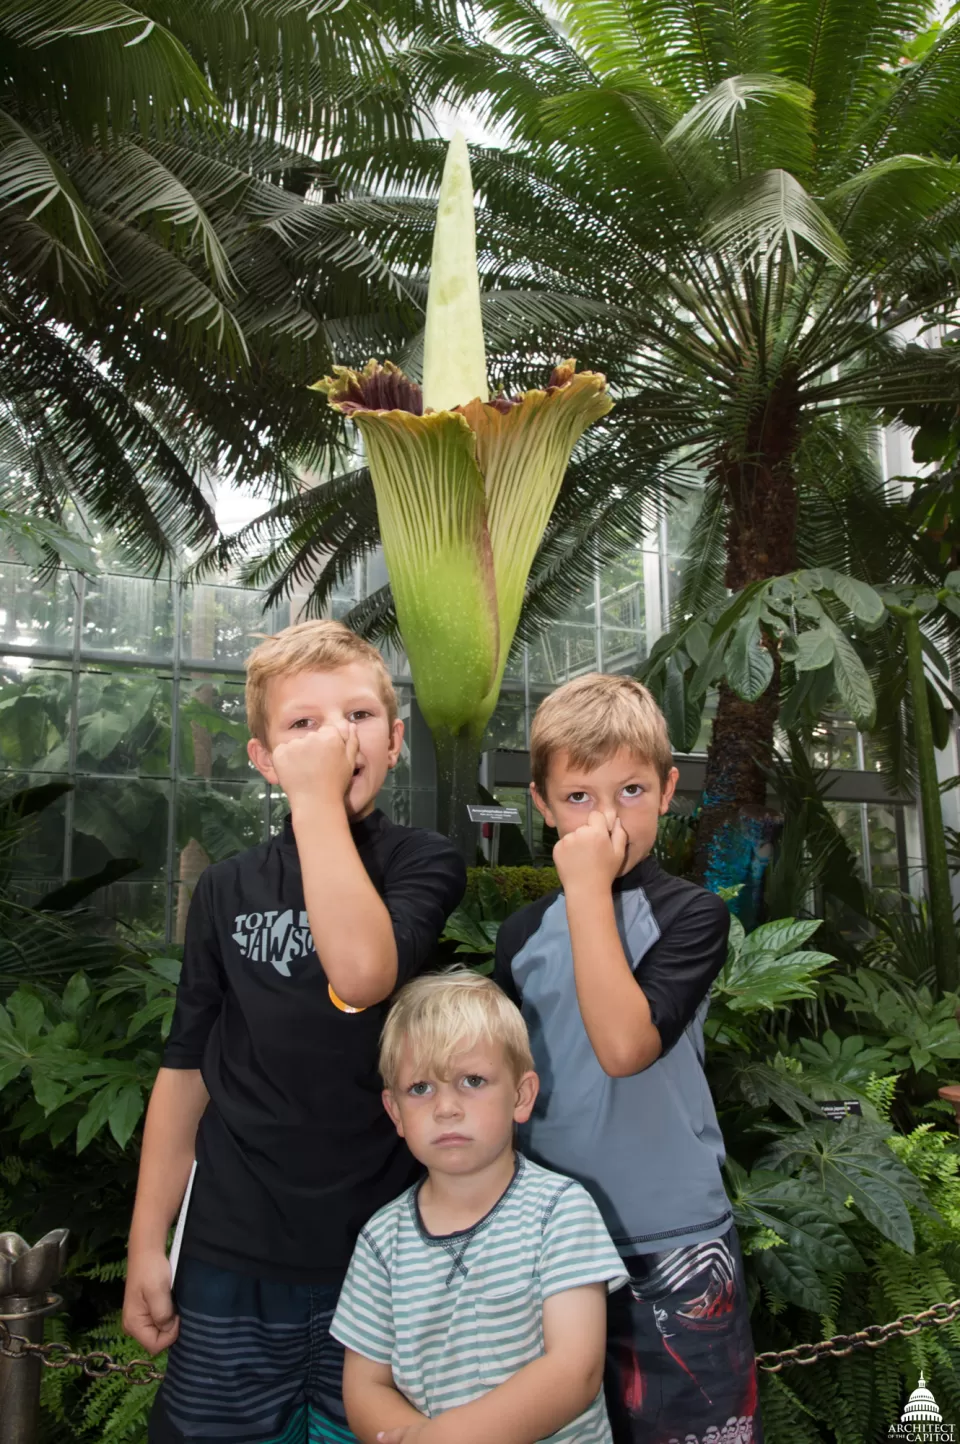 Crowds came from miles around to smell this famous stinky plant.